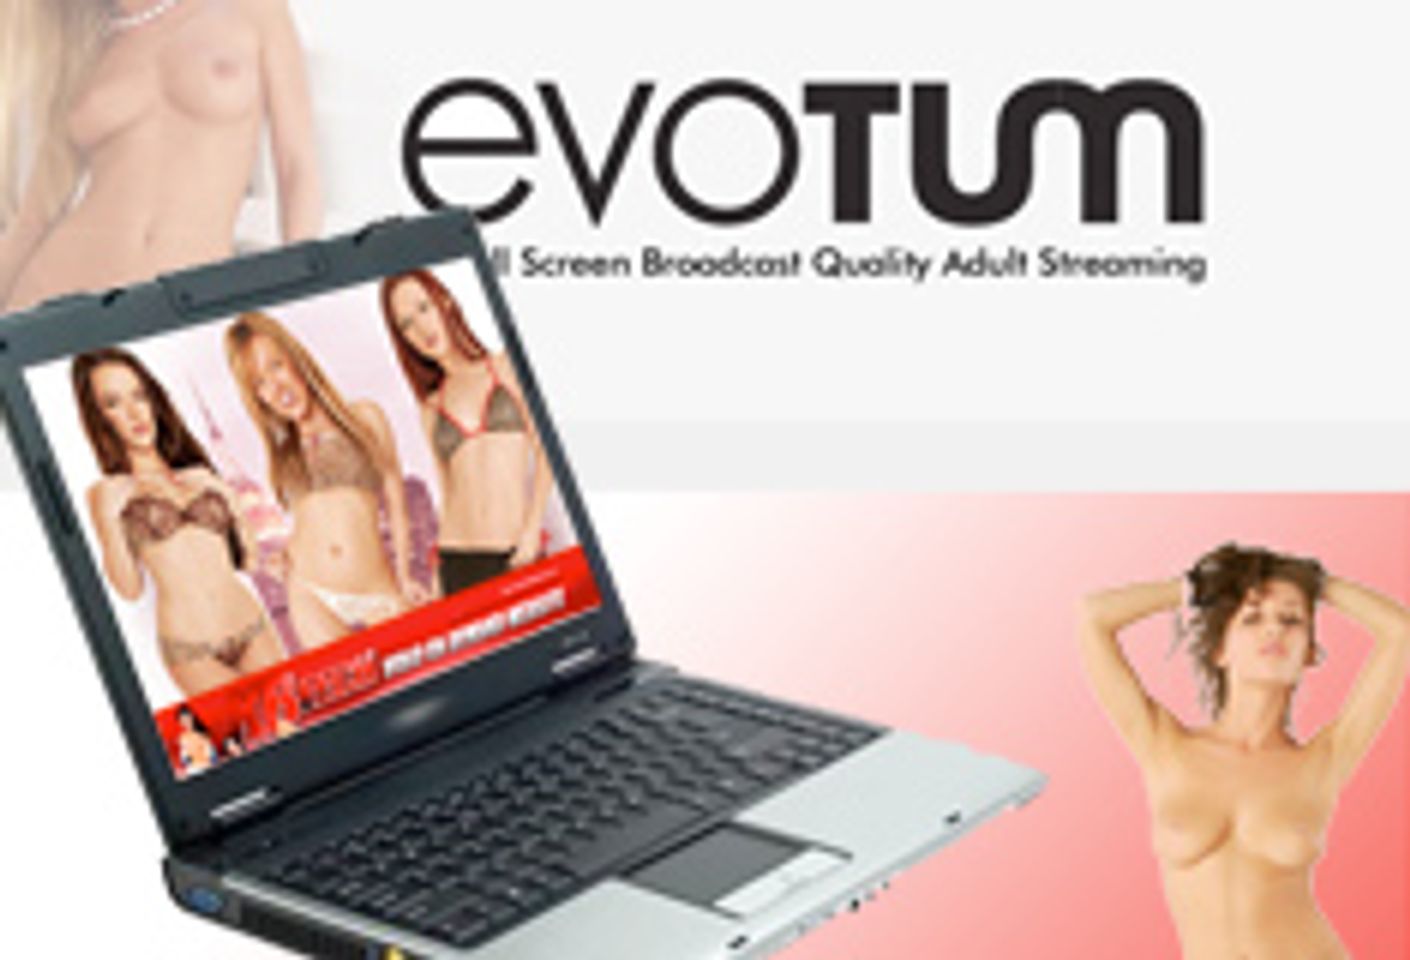 K-Beech to Employ Evotum Streaming Platform for New VOD Service